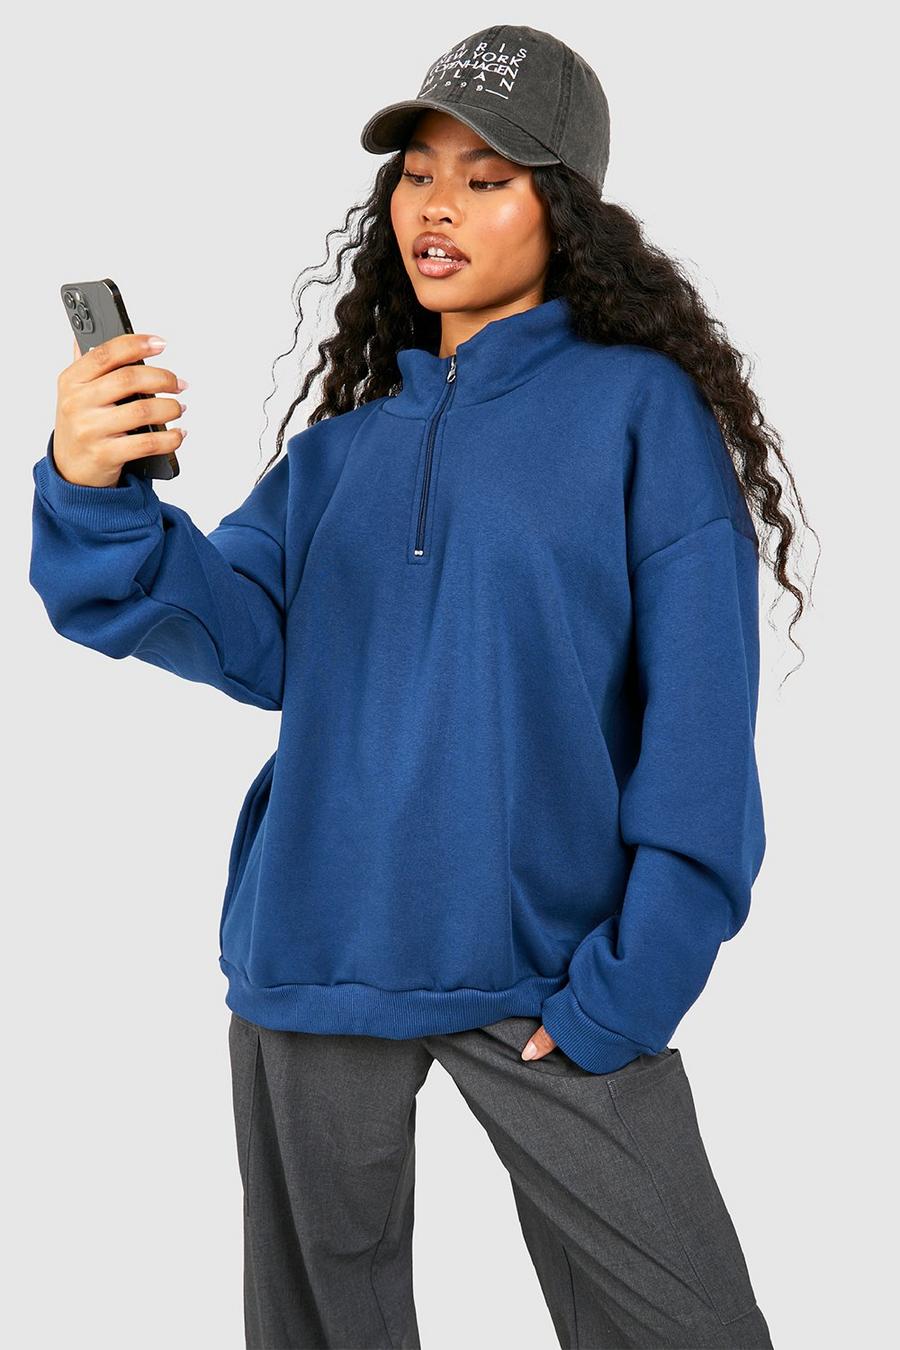 Navy Wear the FILA® Marina Hoodie and stay warm and chic